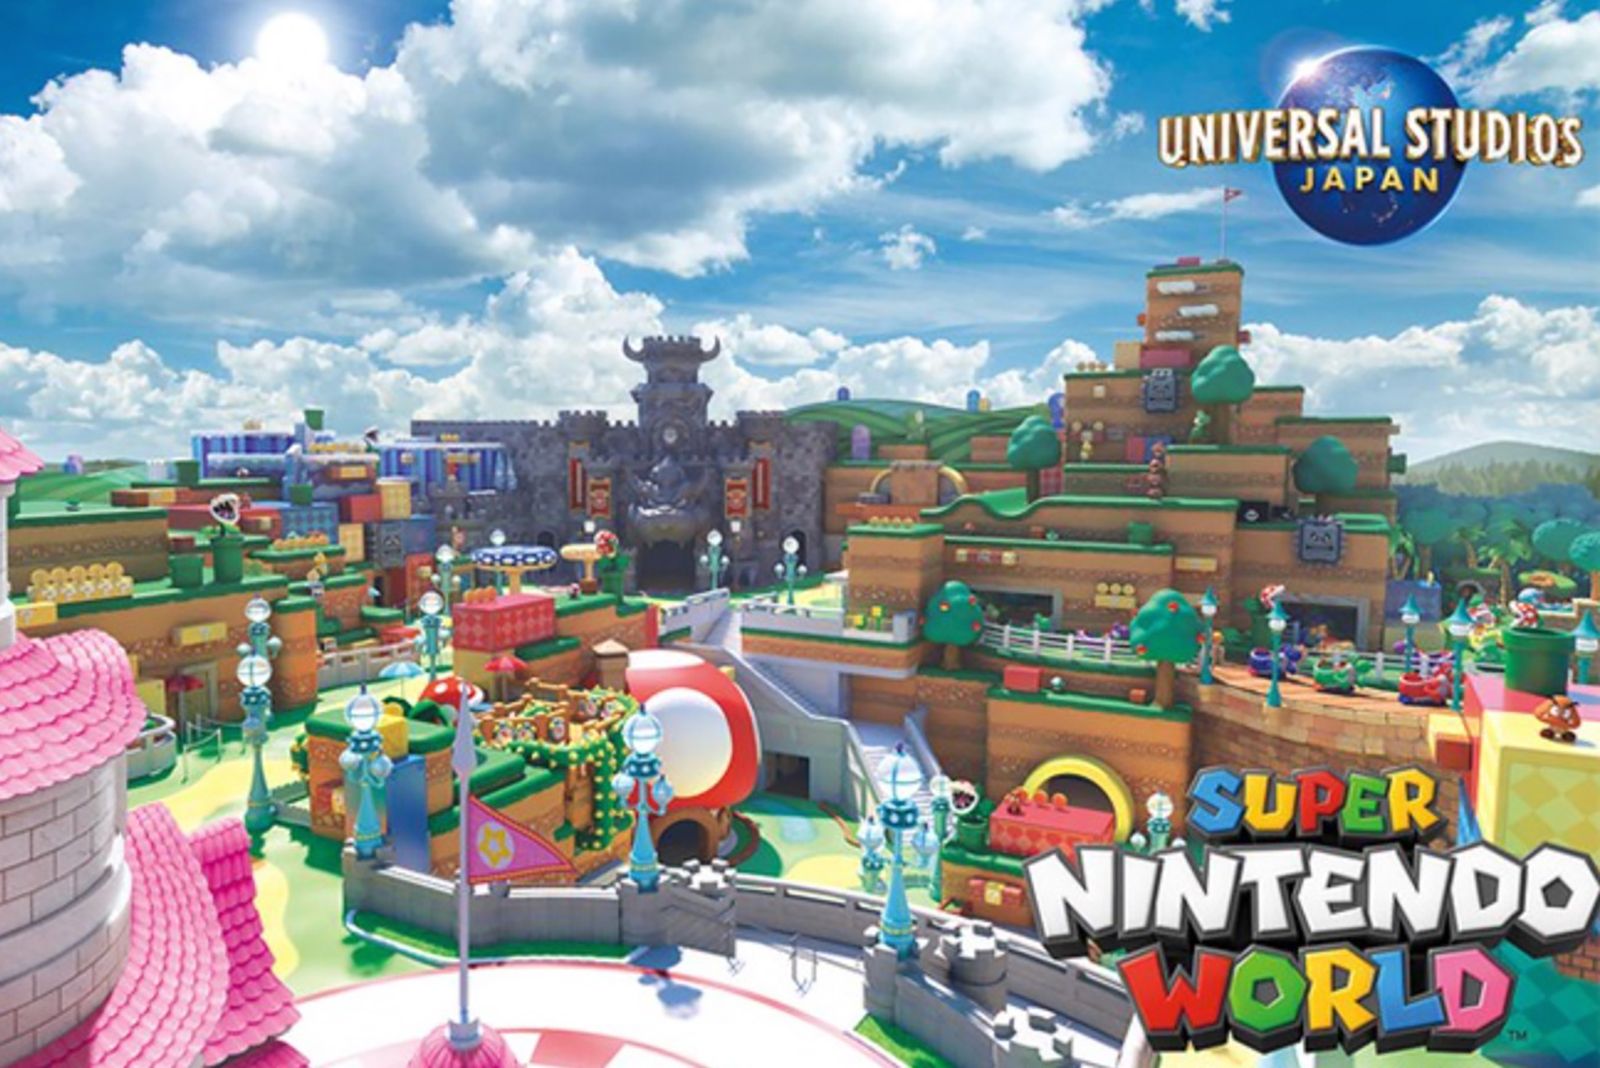 Japan’s Super Nintendo World iis now slated to open in spring 2021 photo 1